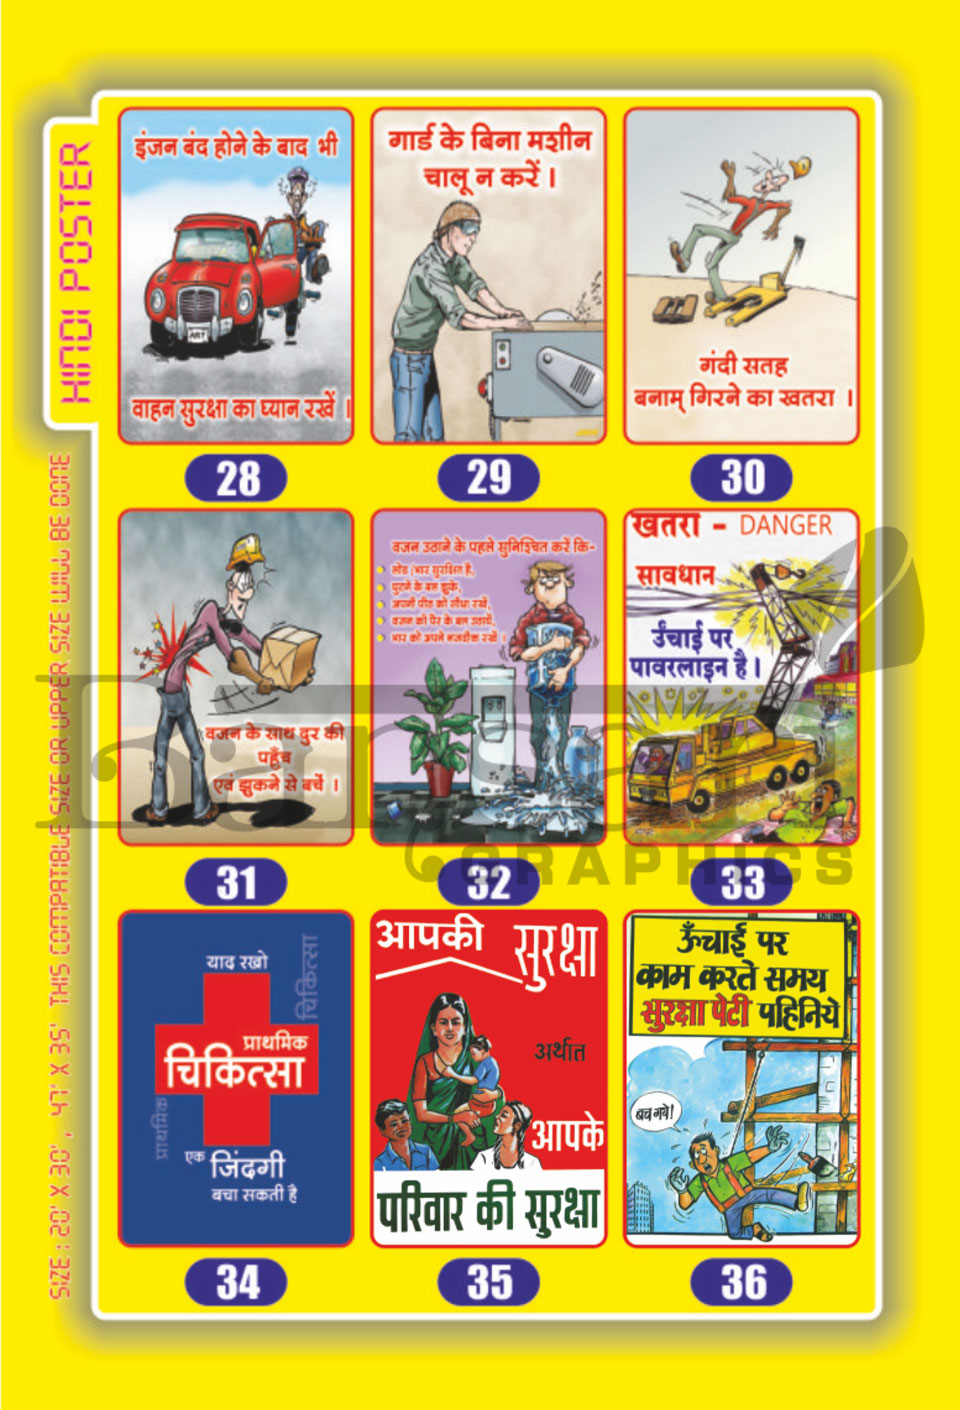 Excavation Safety Poster In Hindi Hse Images Videos Gallery